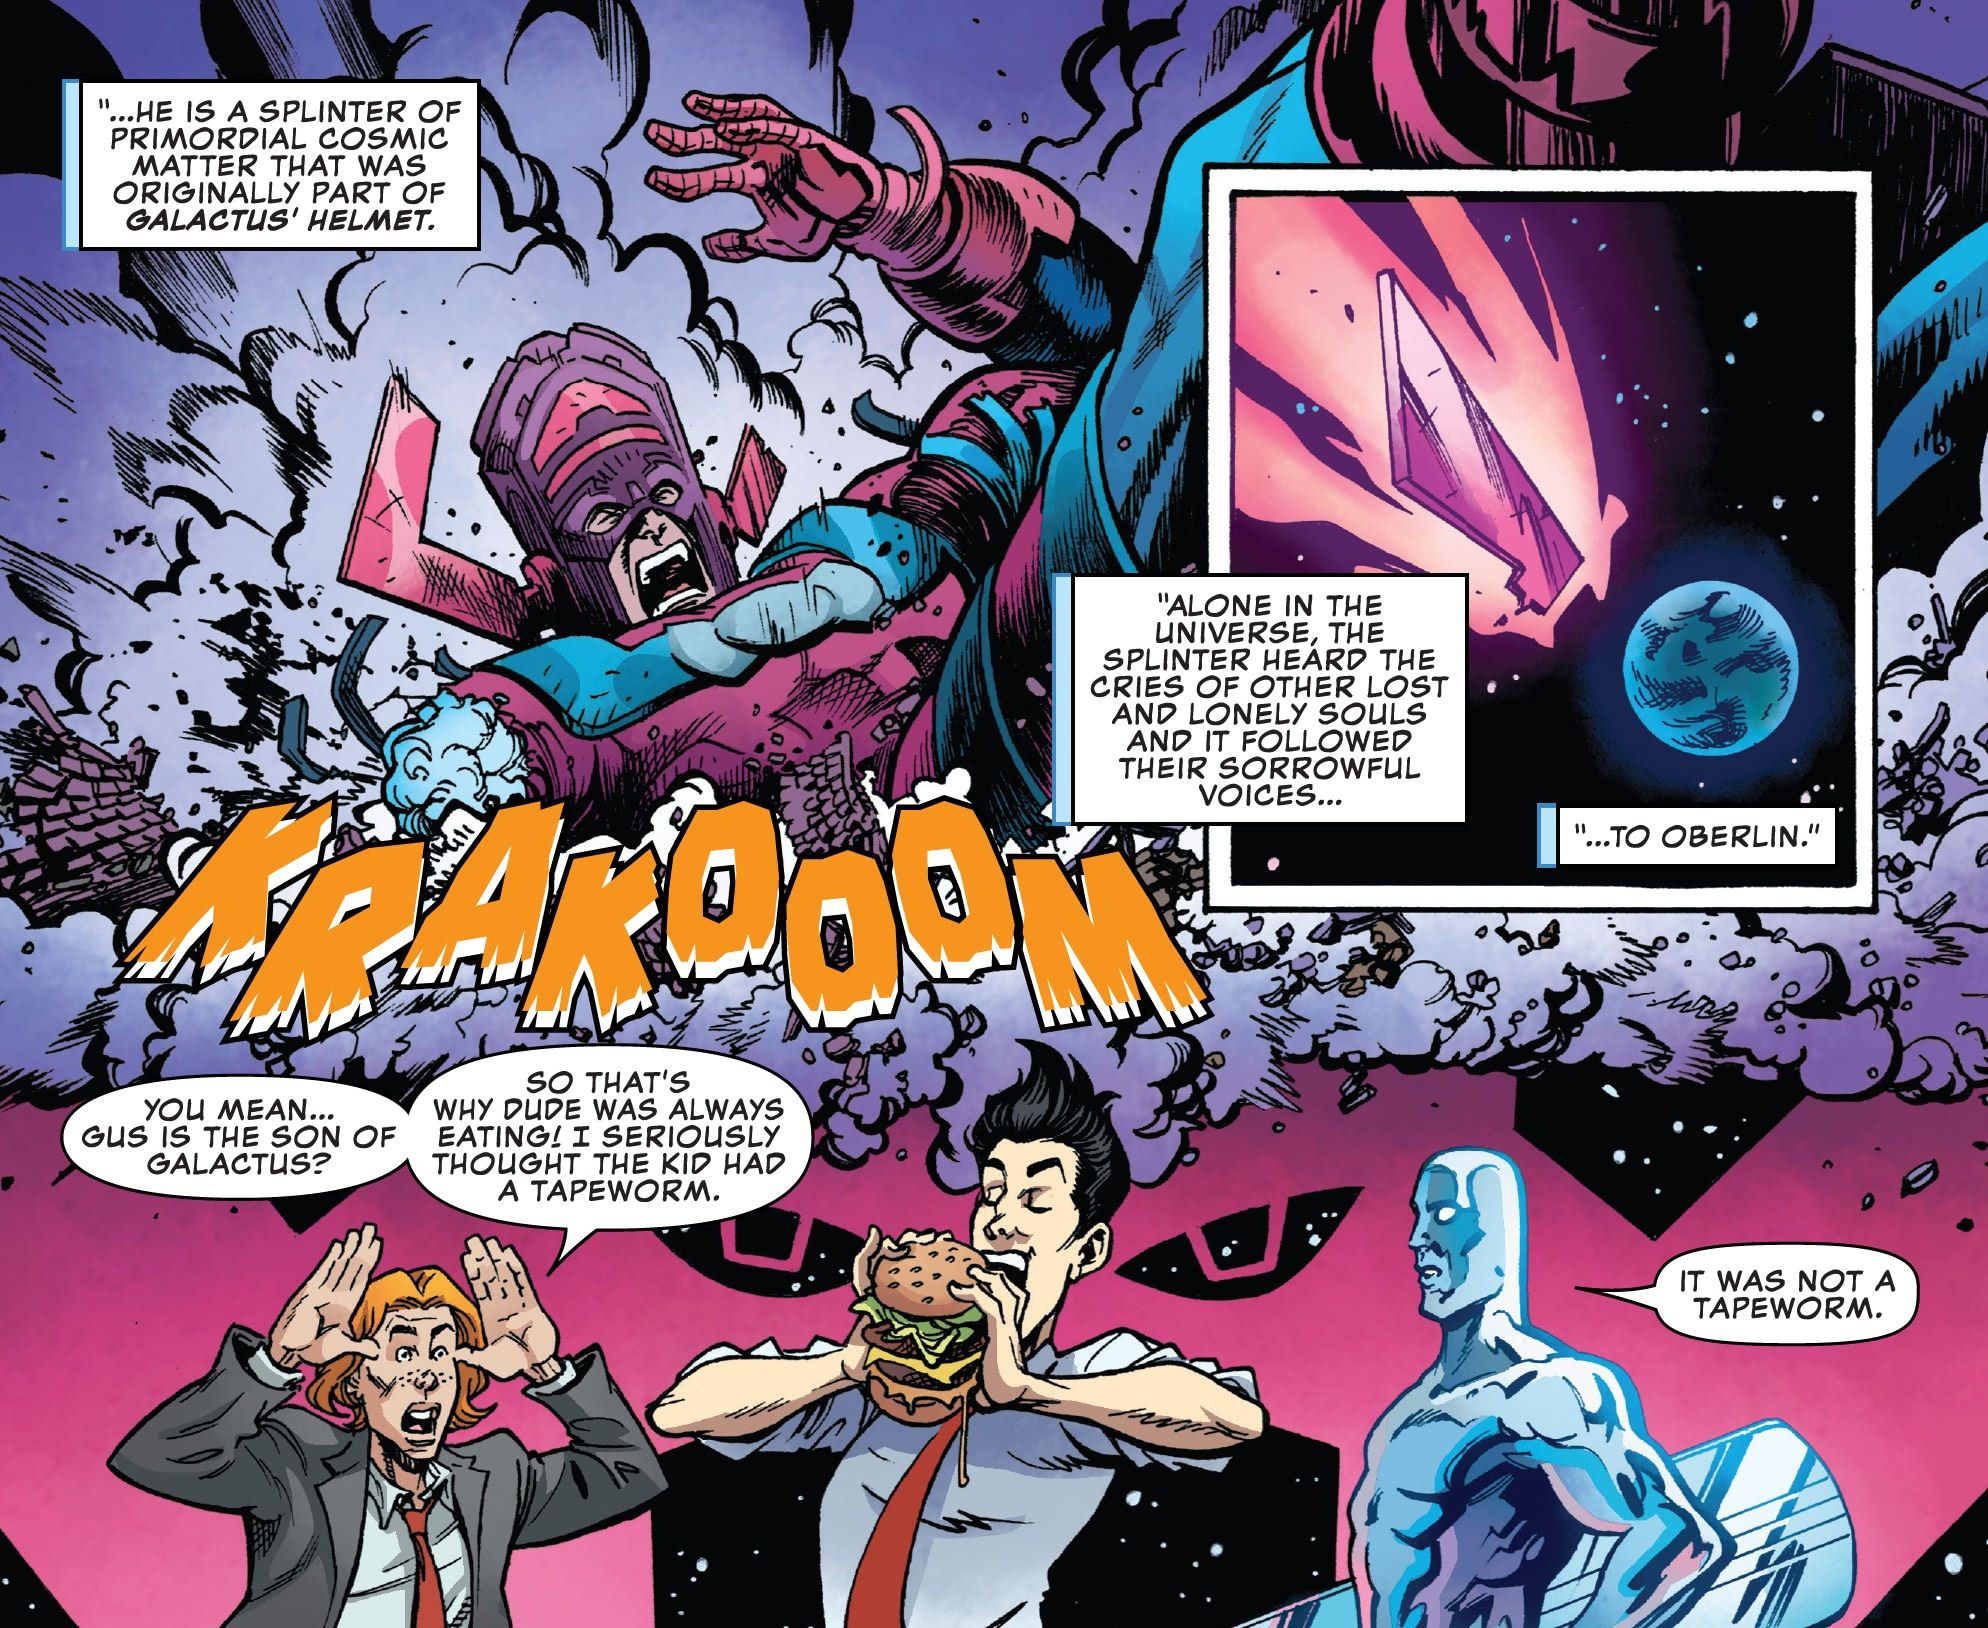 Gus is revealed as the son of Galactus